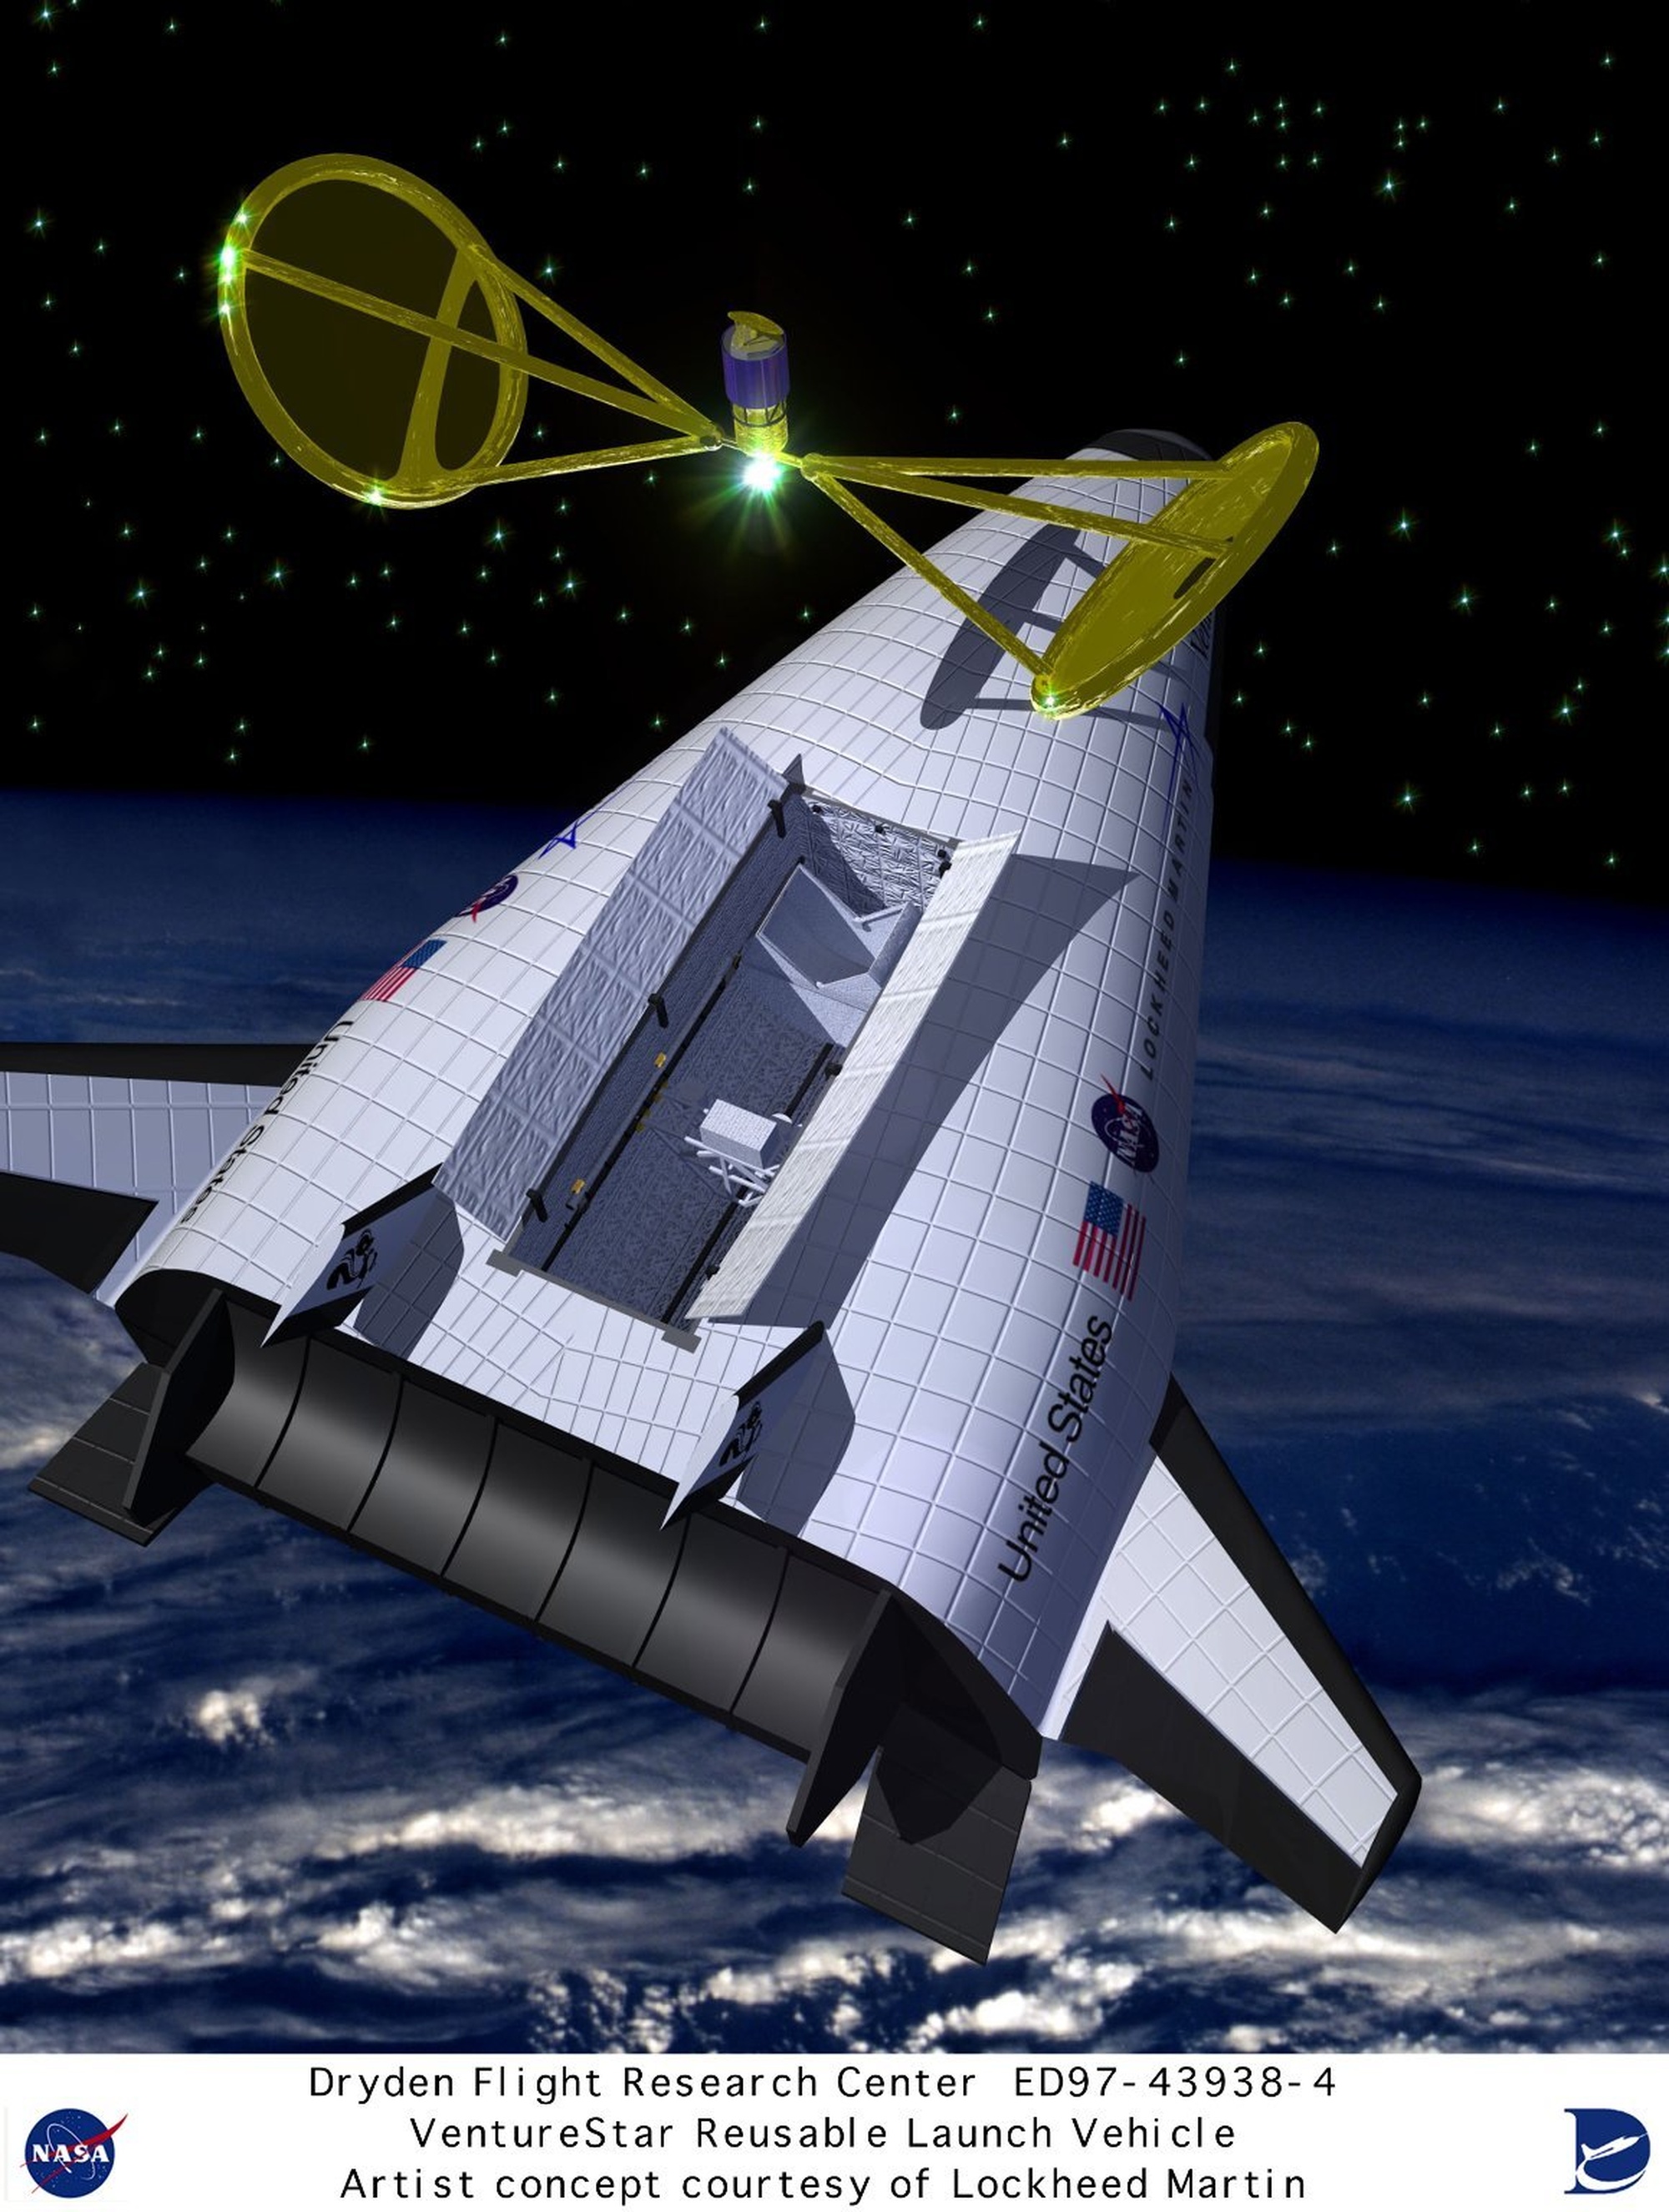 manned space flight concepts